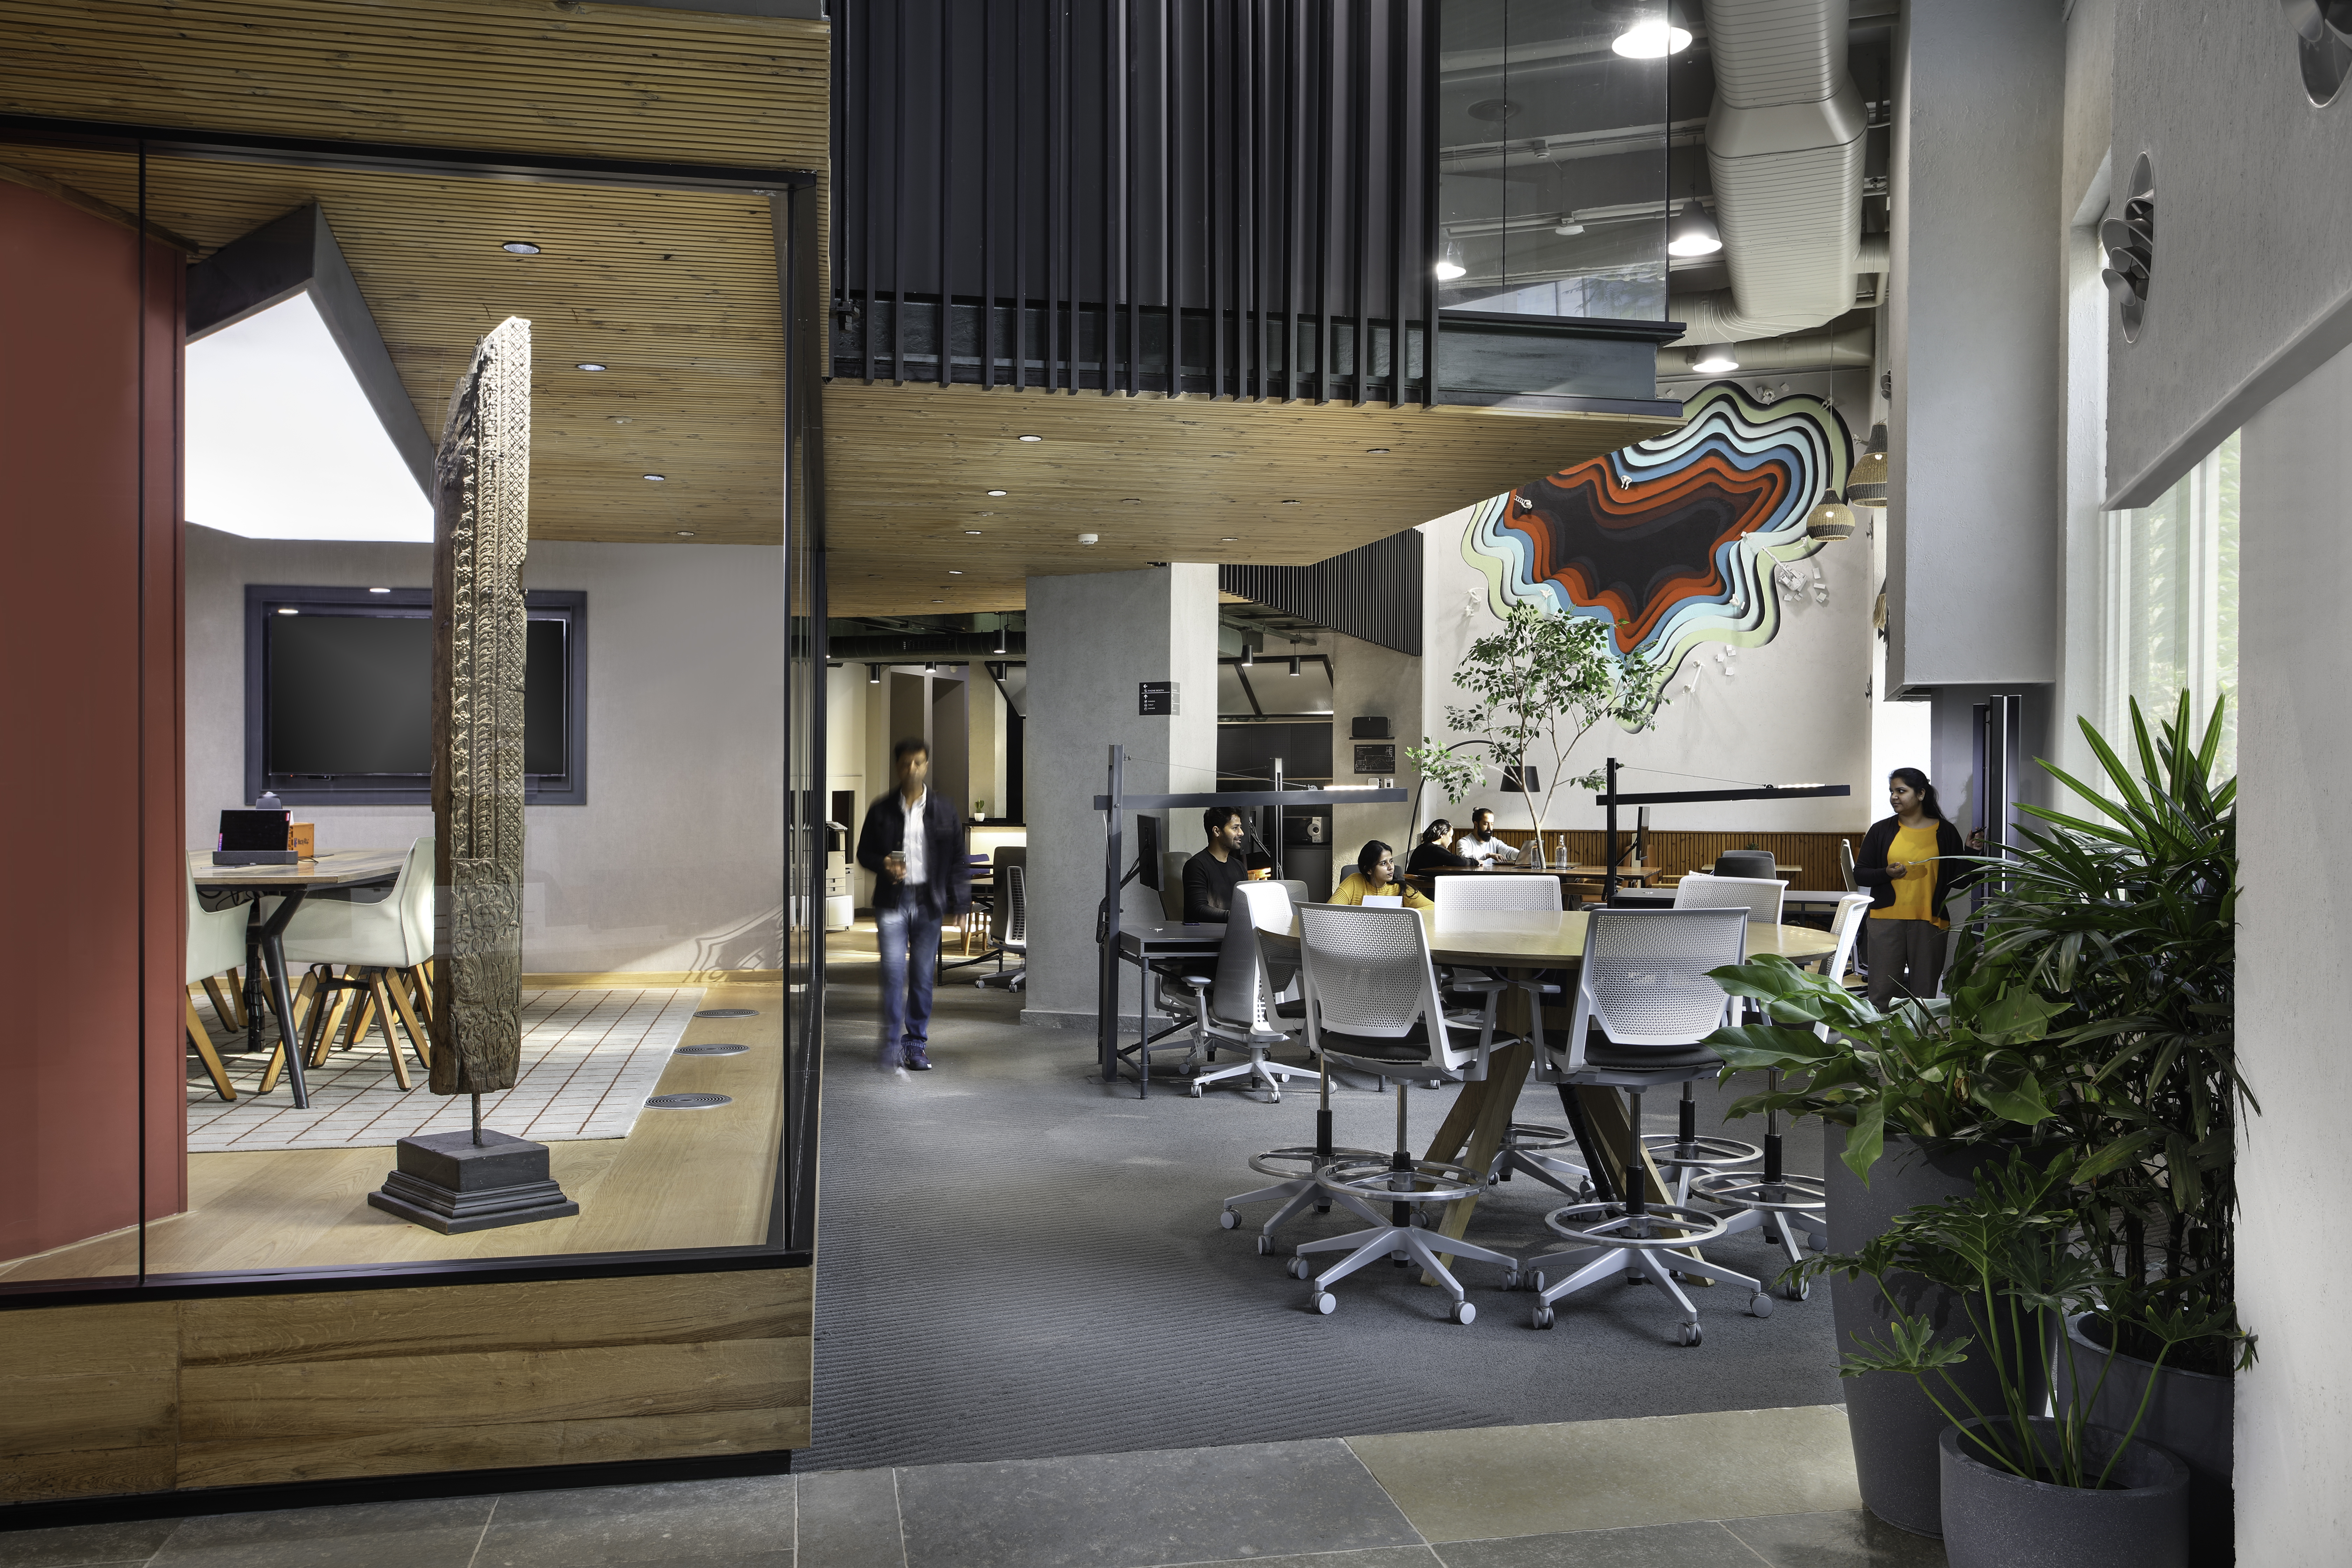 Space Matrix Beta Lab uses the latest IoT technology platform to integrate building and lighting management systems with workplace technologies